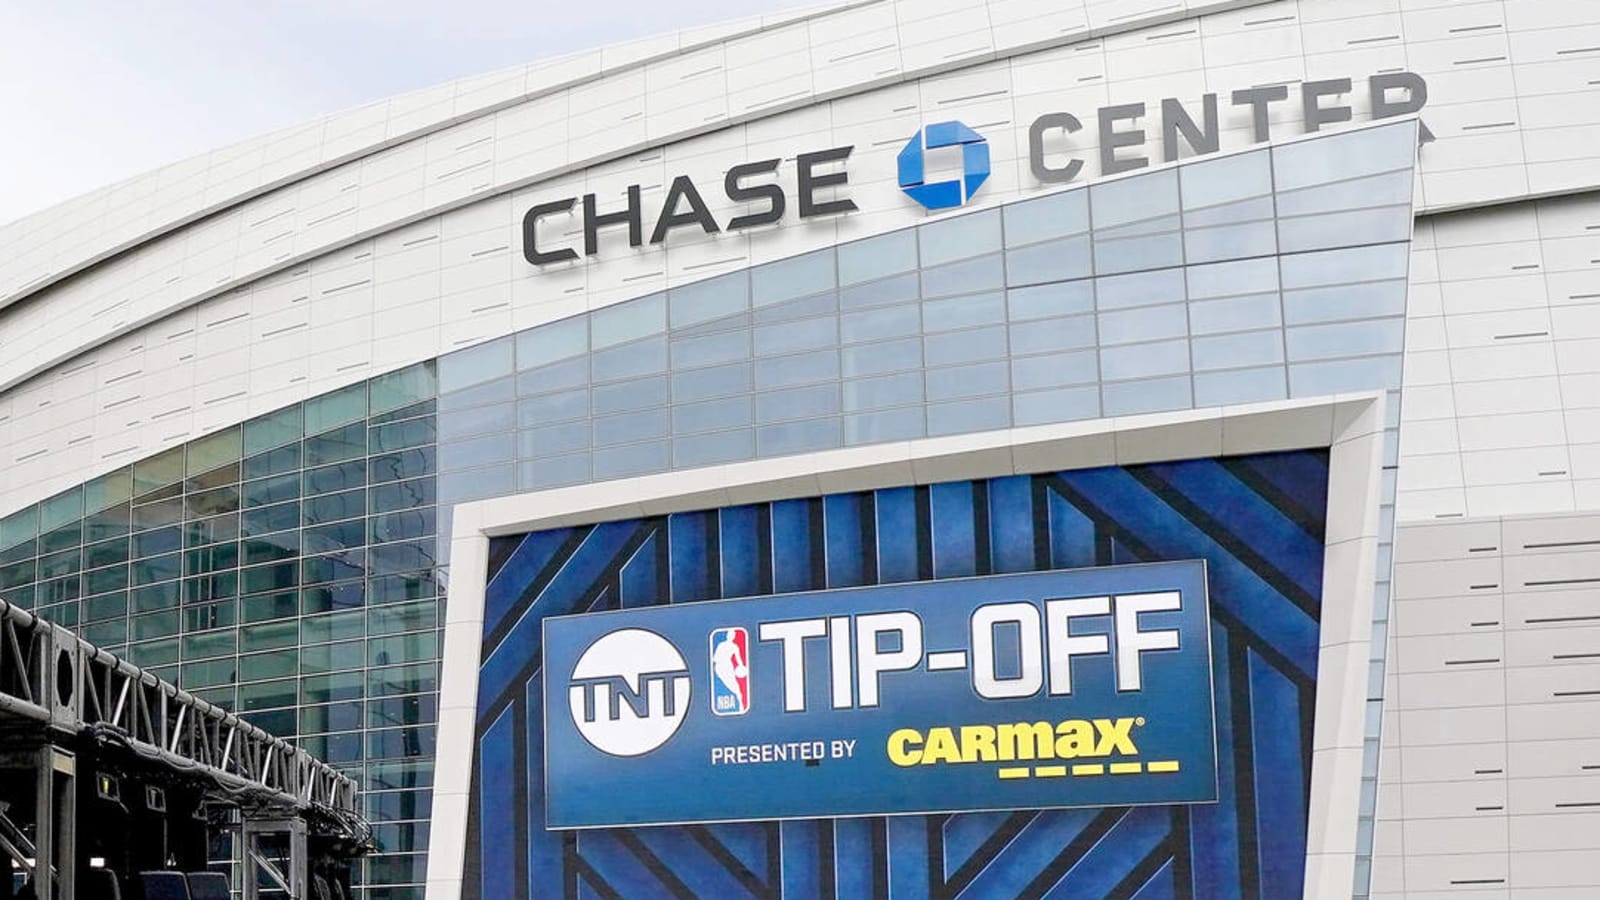 Klay Thompson impersonator banned from Chase Center?